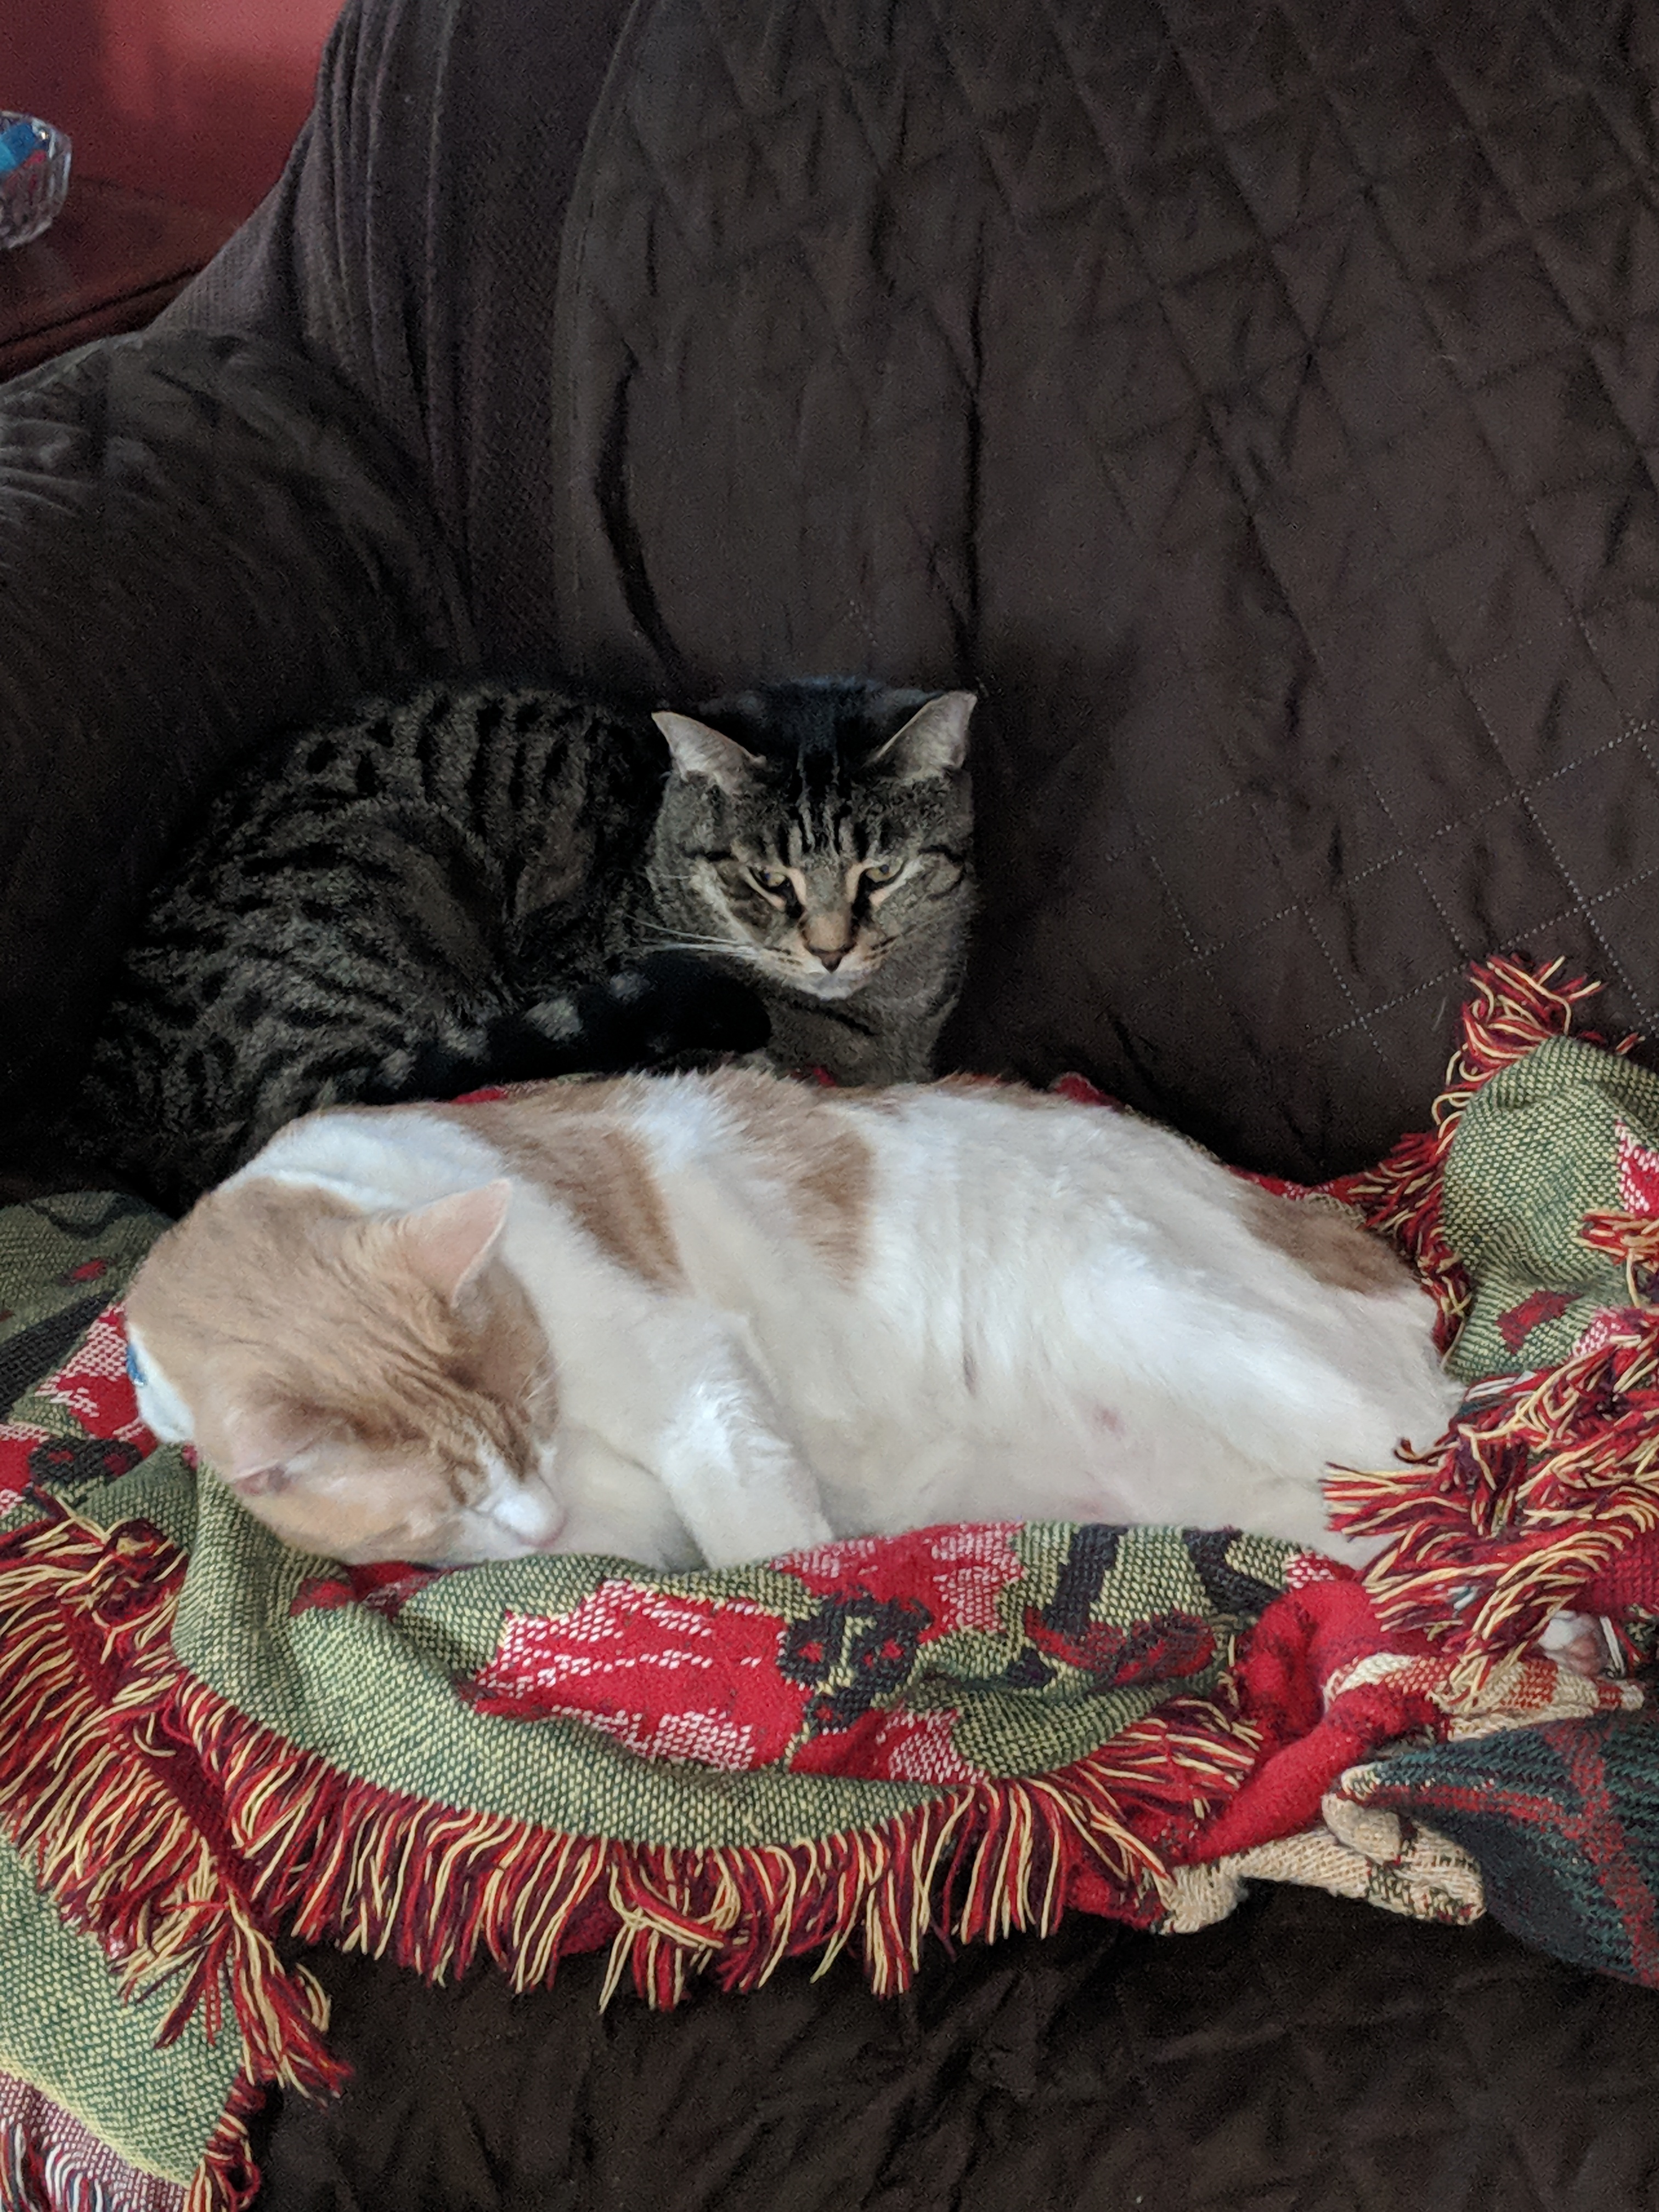 Duncan & Barry Napping